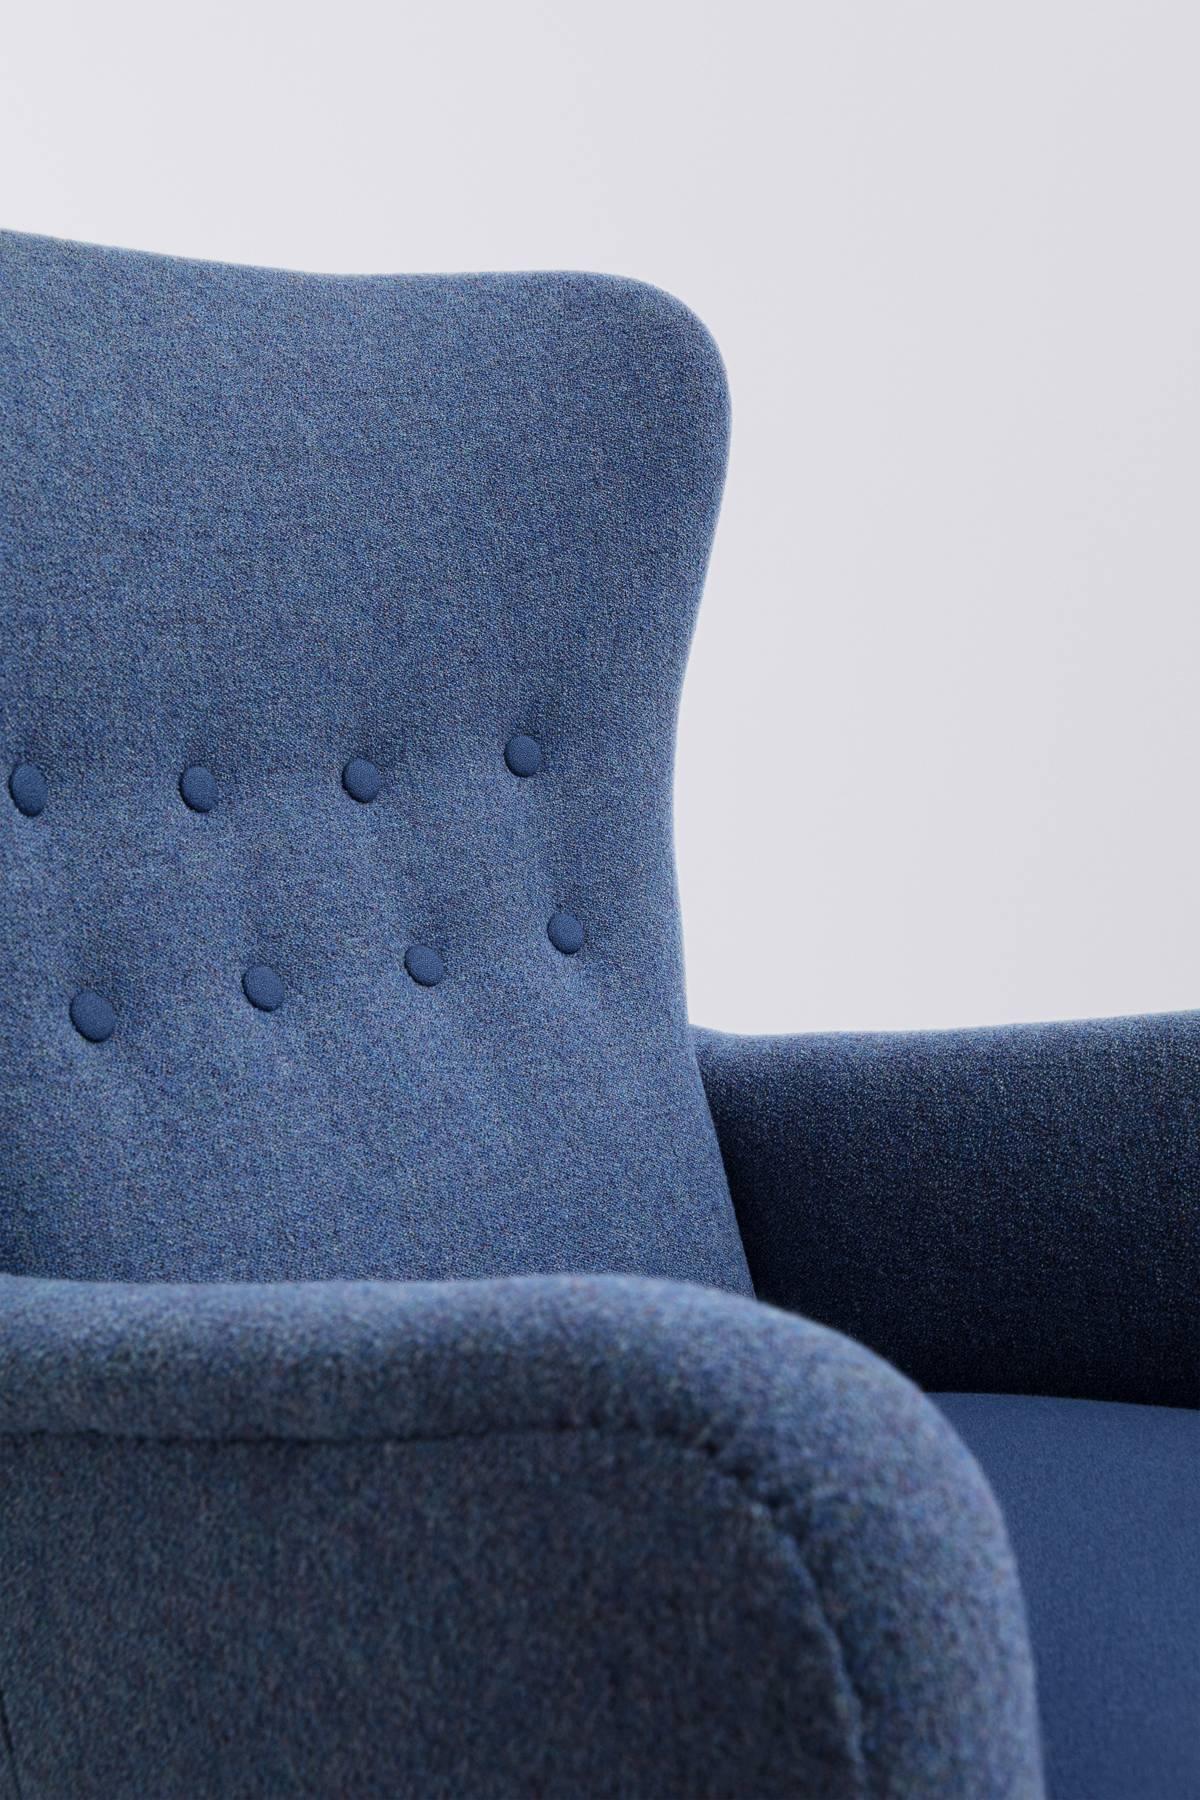 Danish Produced Wingback Chair, 1940s, Blue Wool Upholstery by Kvadrat In Excellent Condition For Sale In Copenhagen, DK